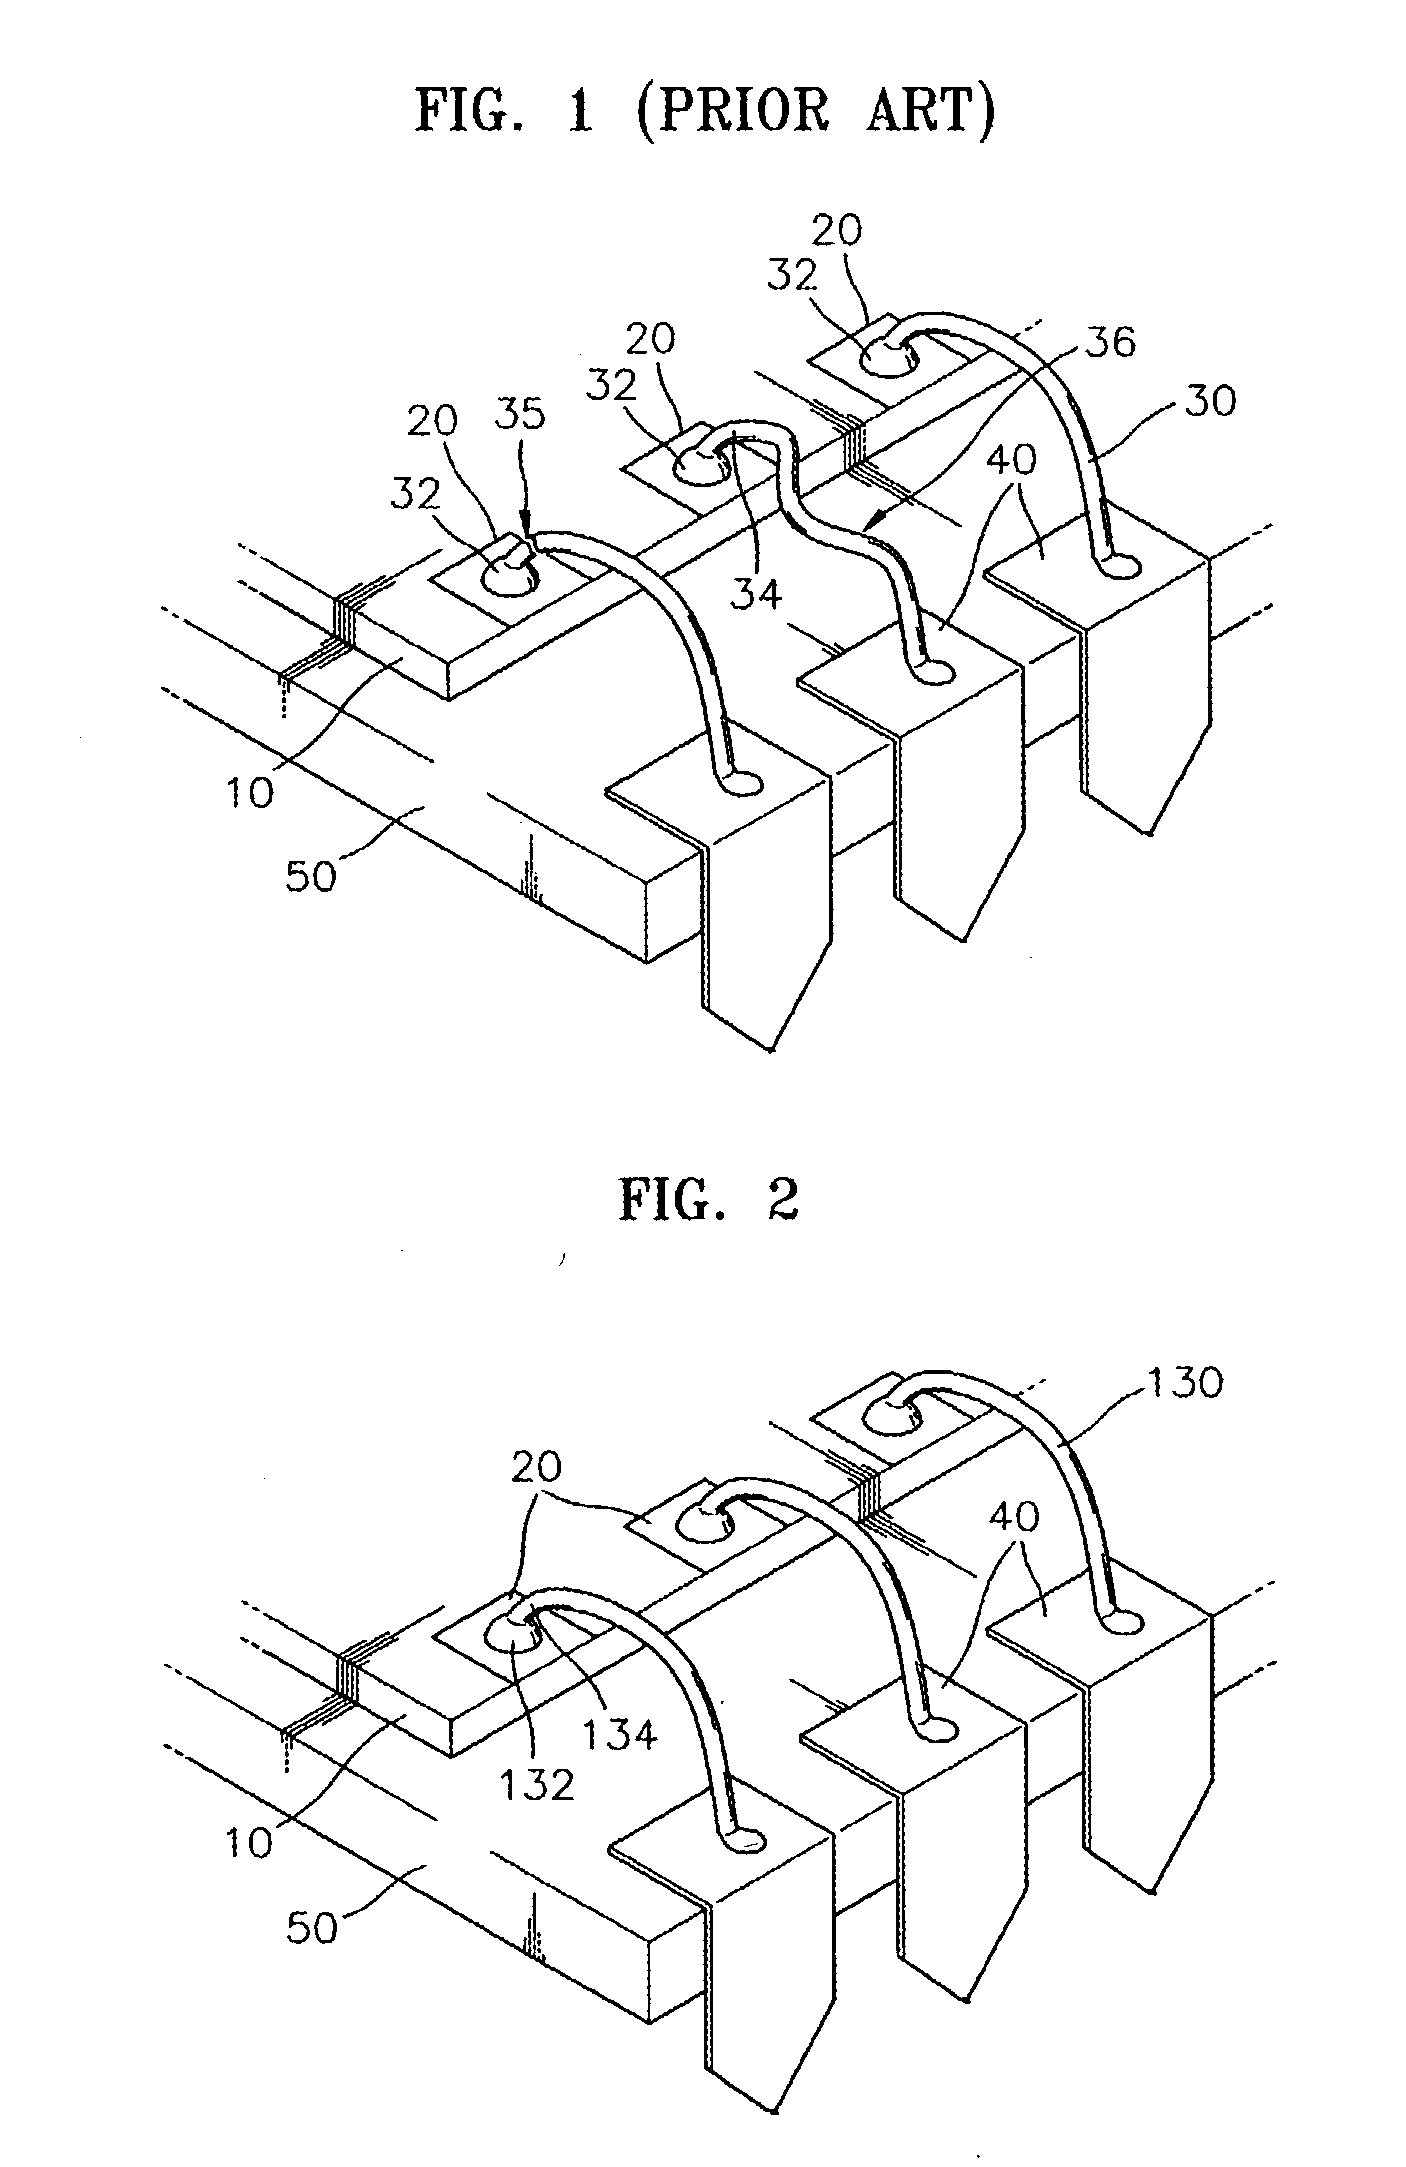 Gold-silver bonding wire for semiconductor device